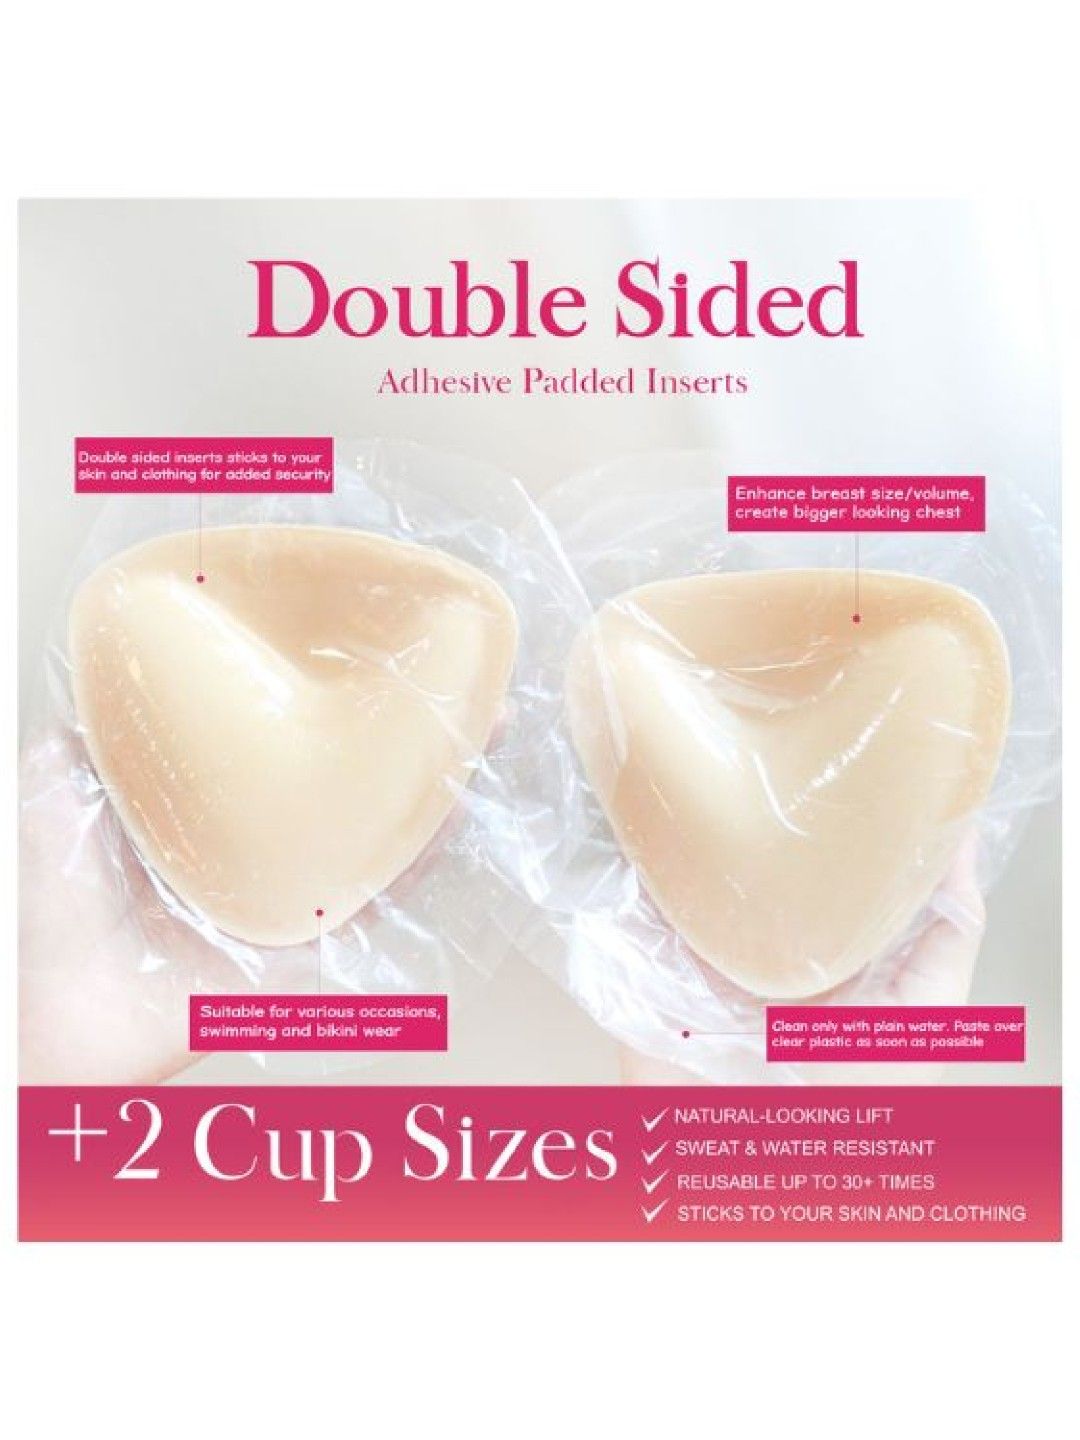 Tamme Double Sided Adhesive Padded Inserts (1.5in Thick)